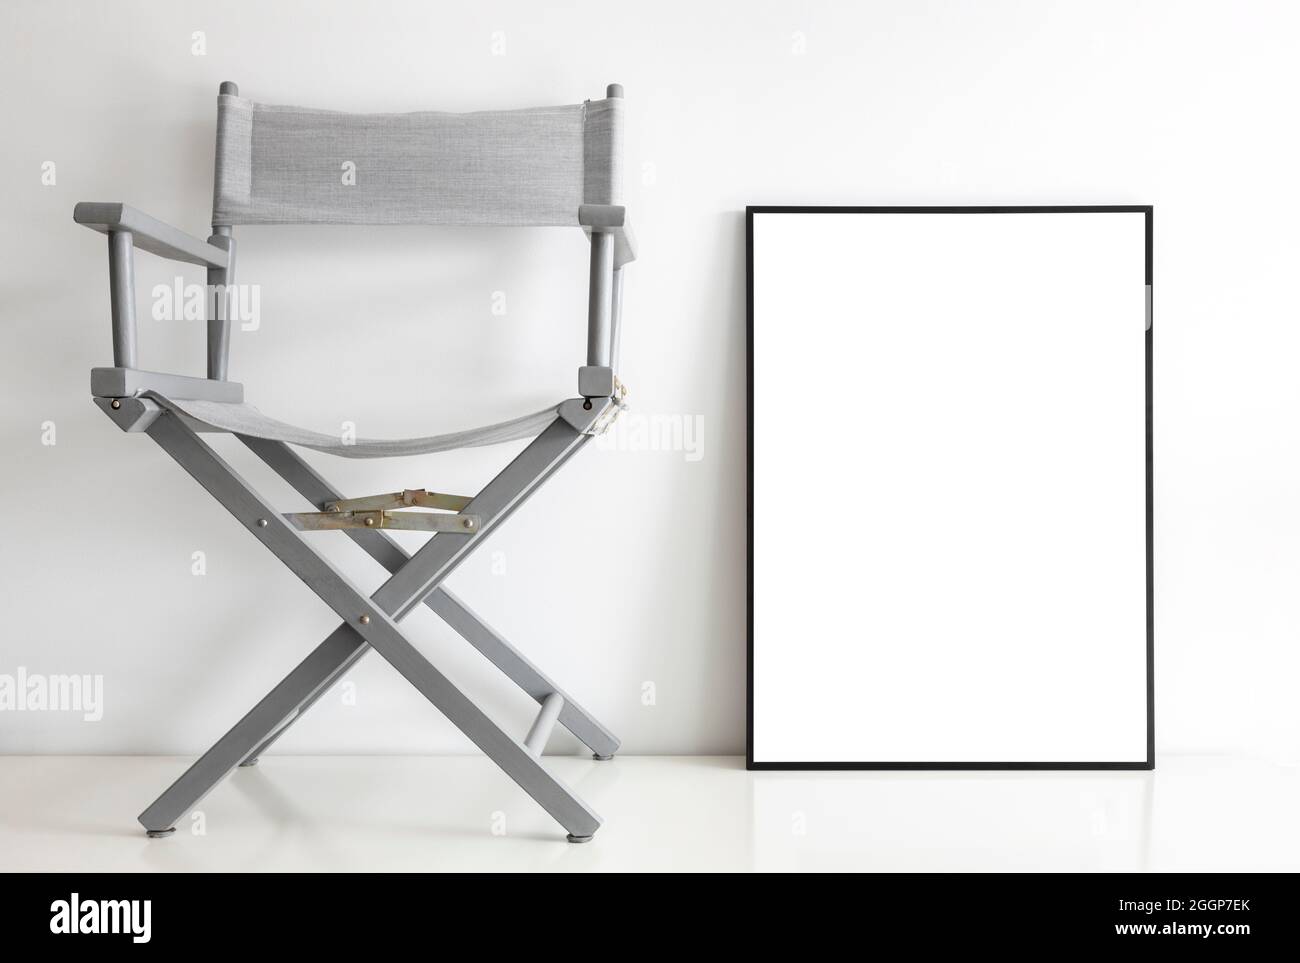 Mock up frame and directors chair. Stock Photo